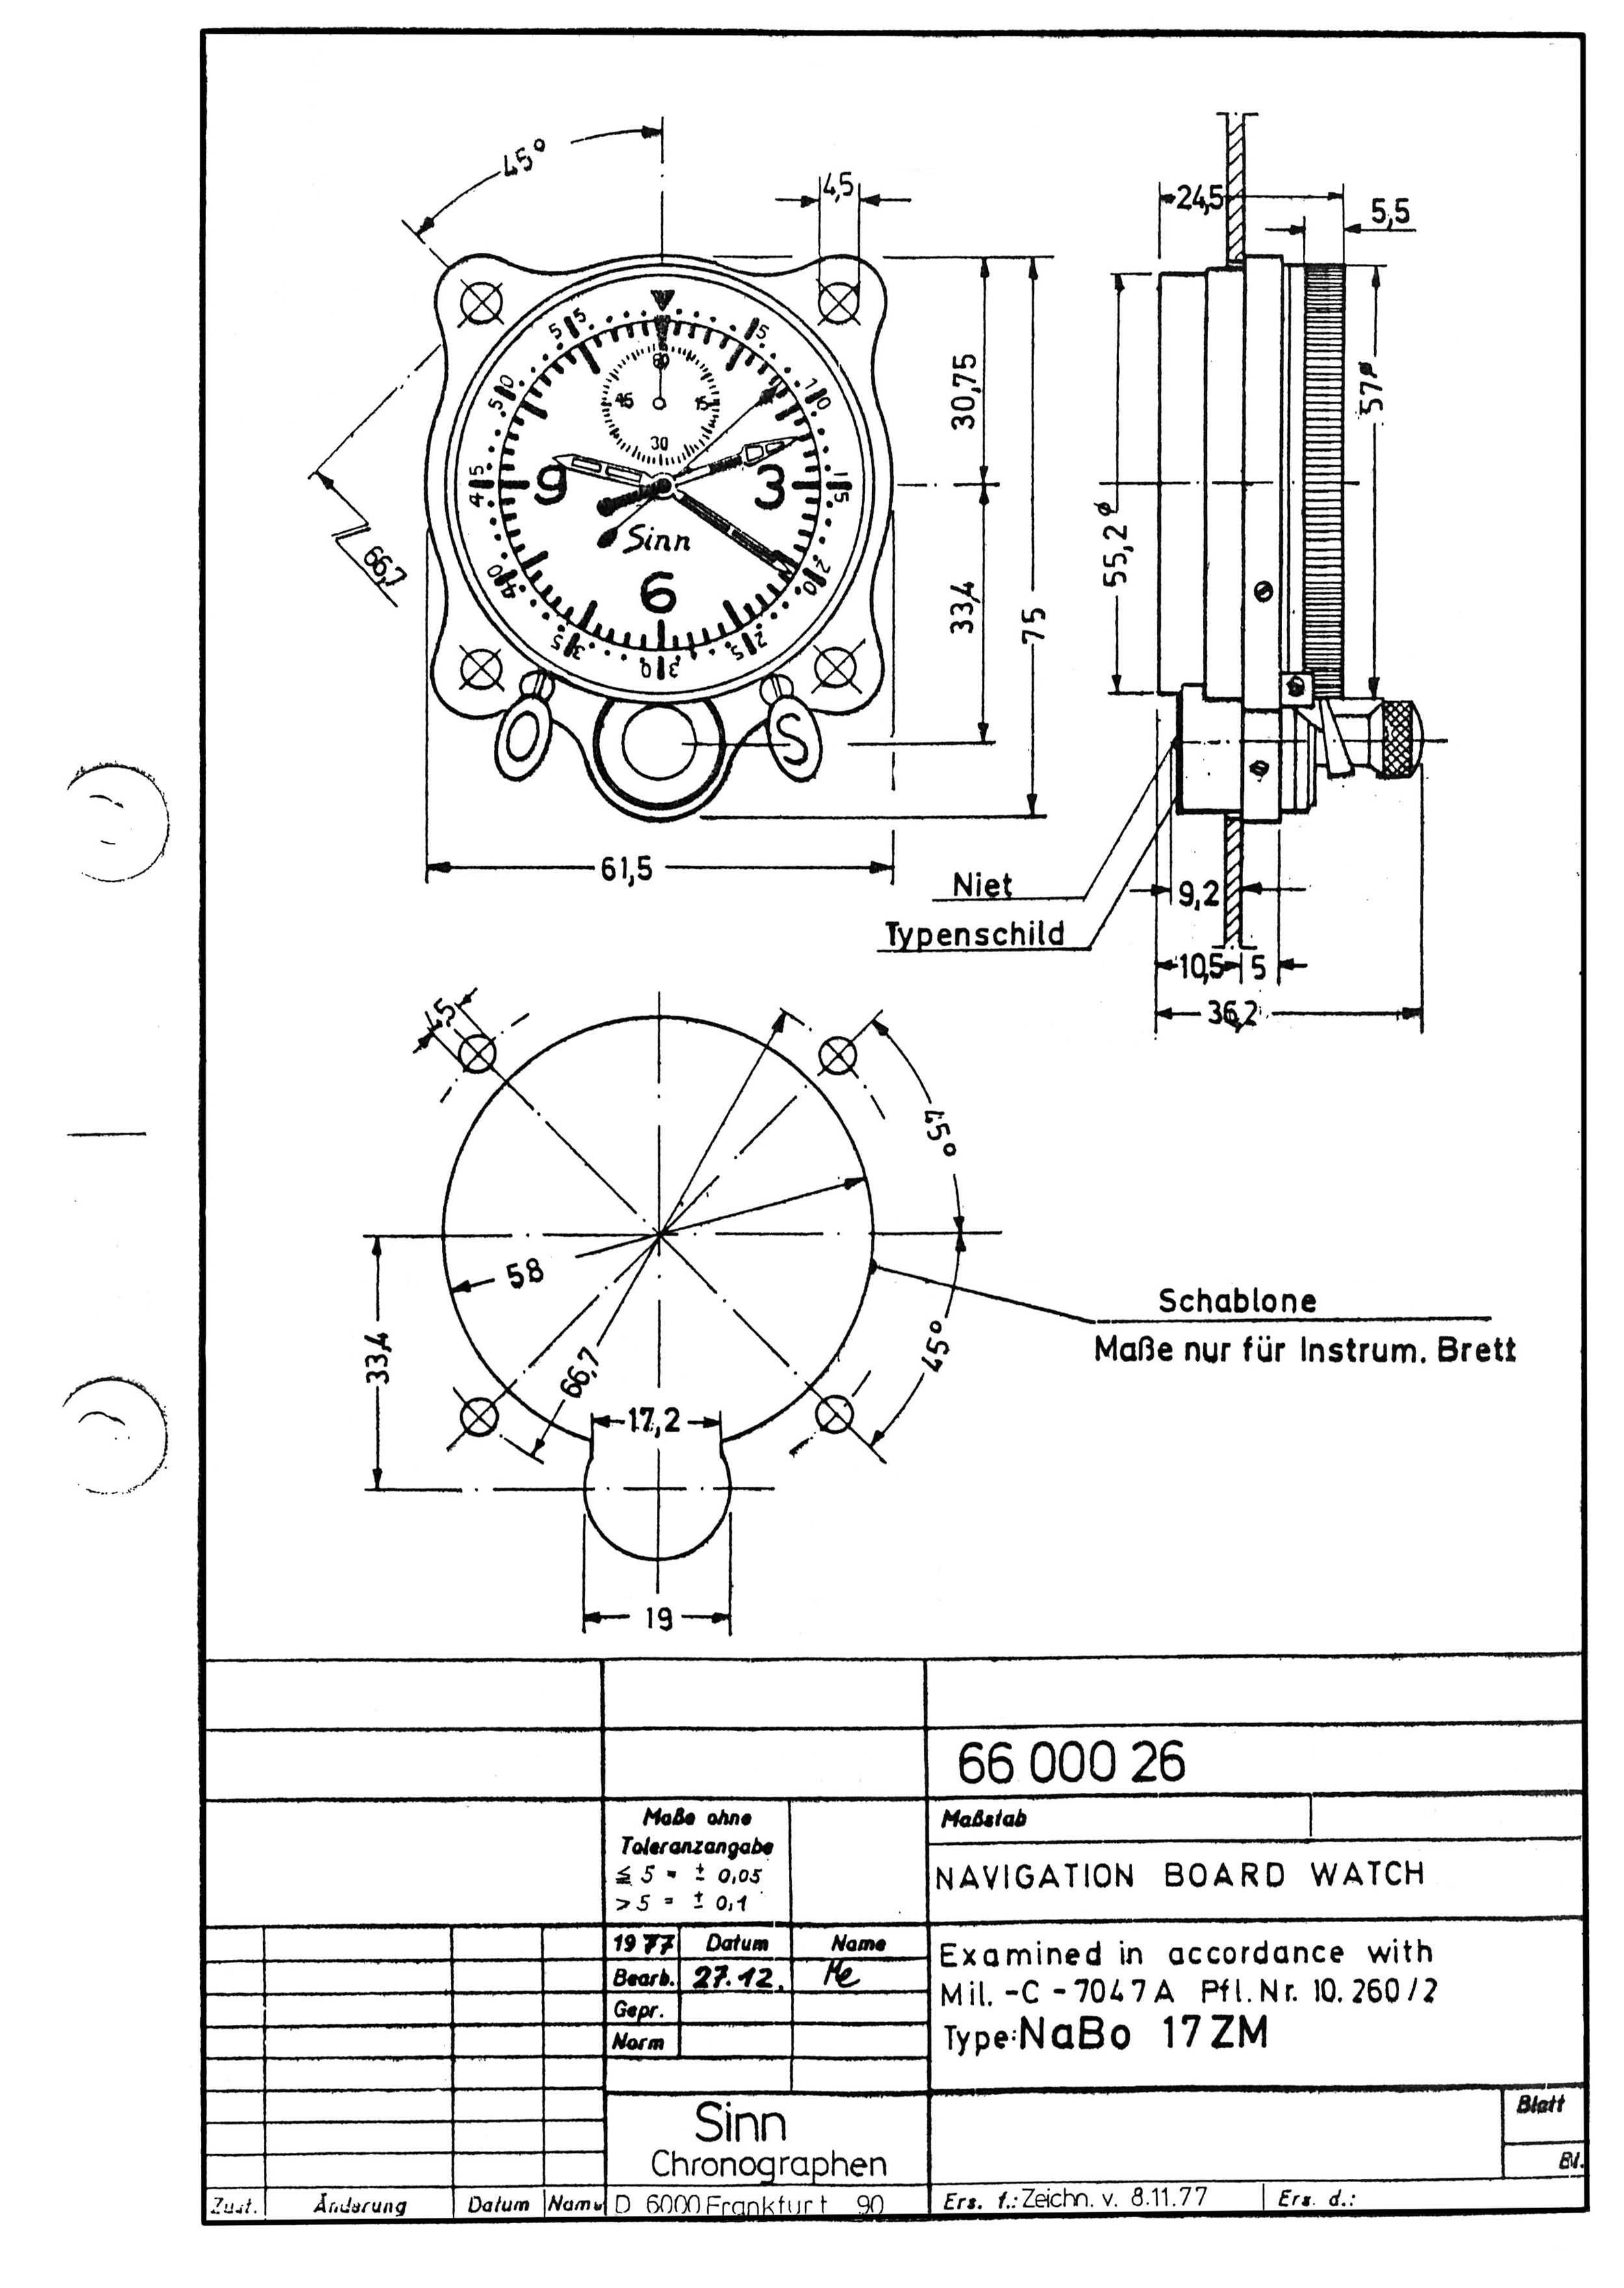 Technical drawing of the NaBo 17 ZM from 1977. 